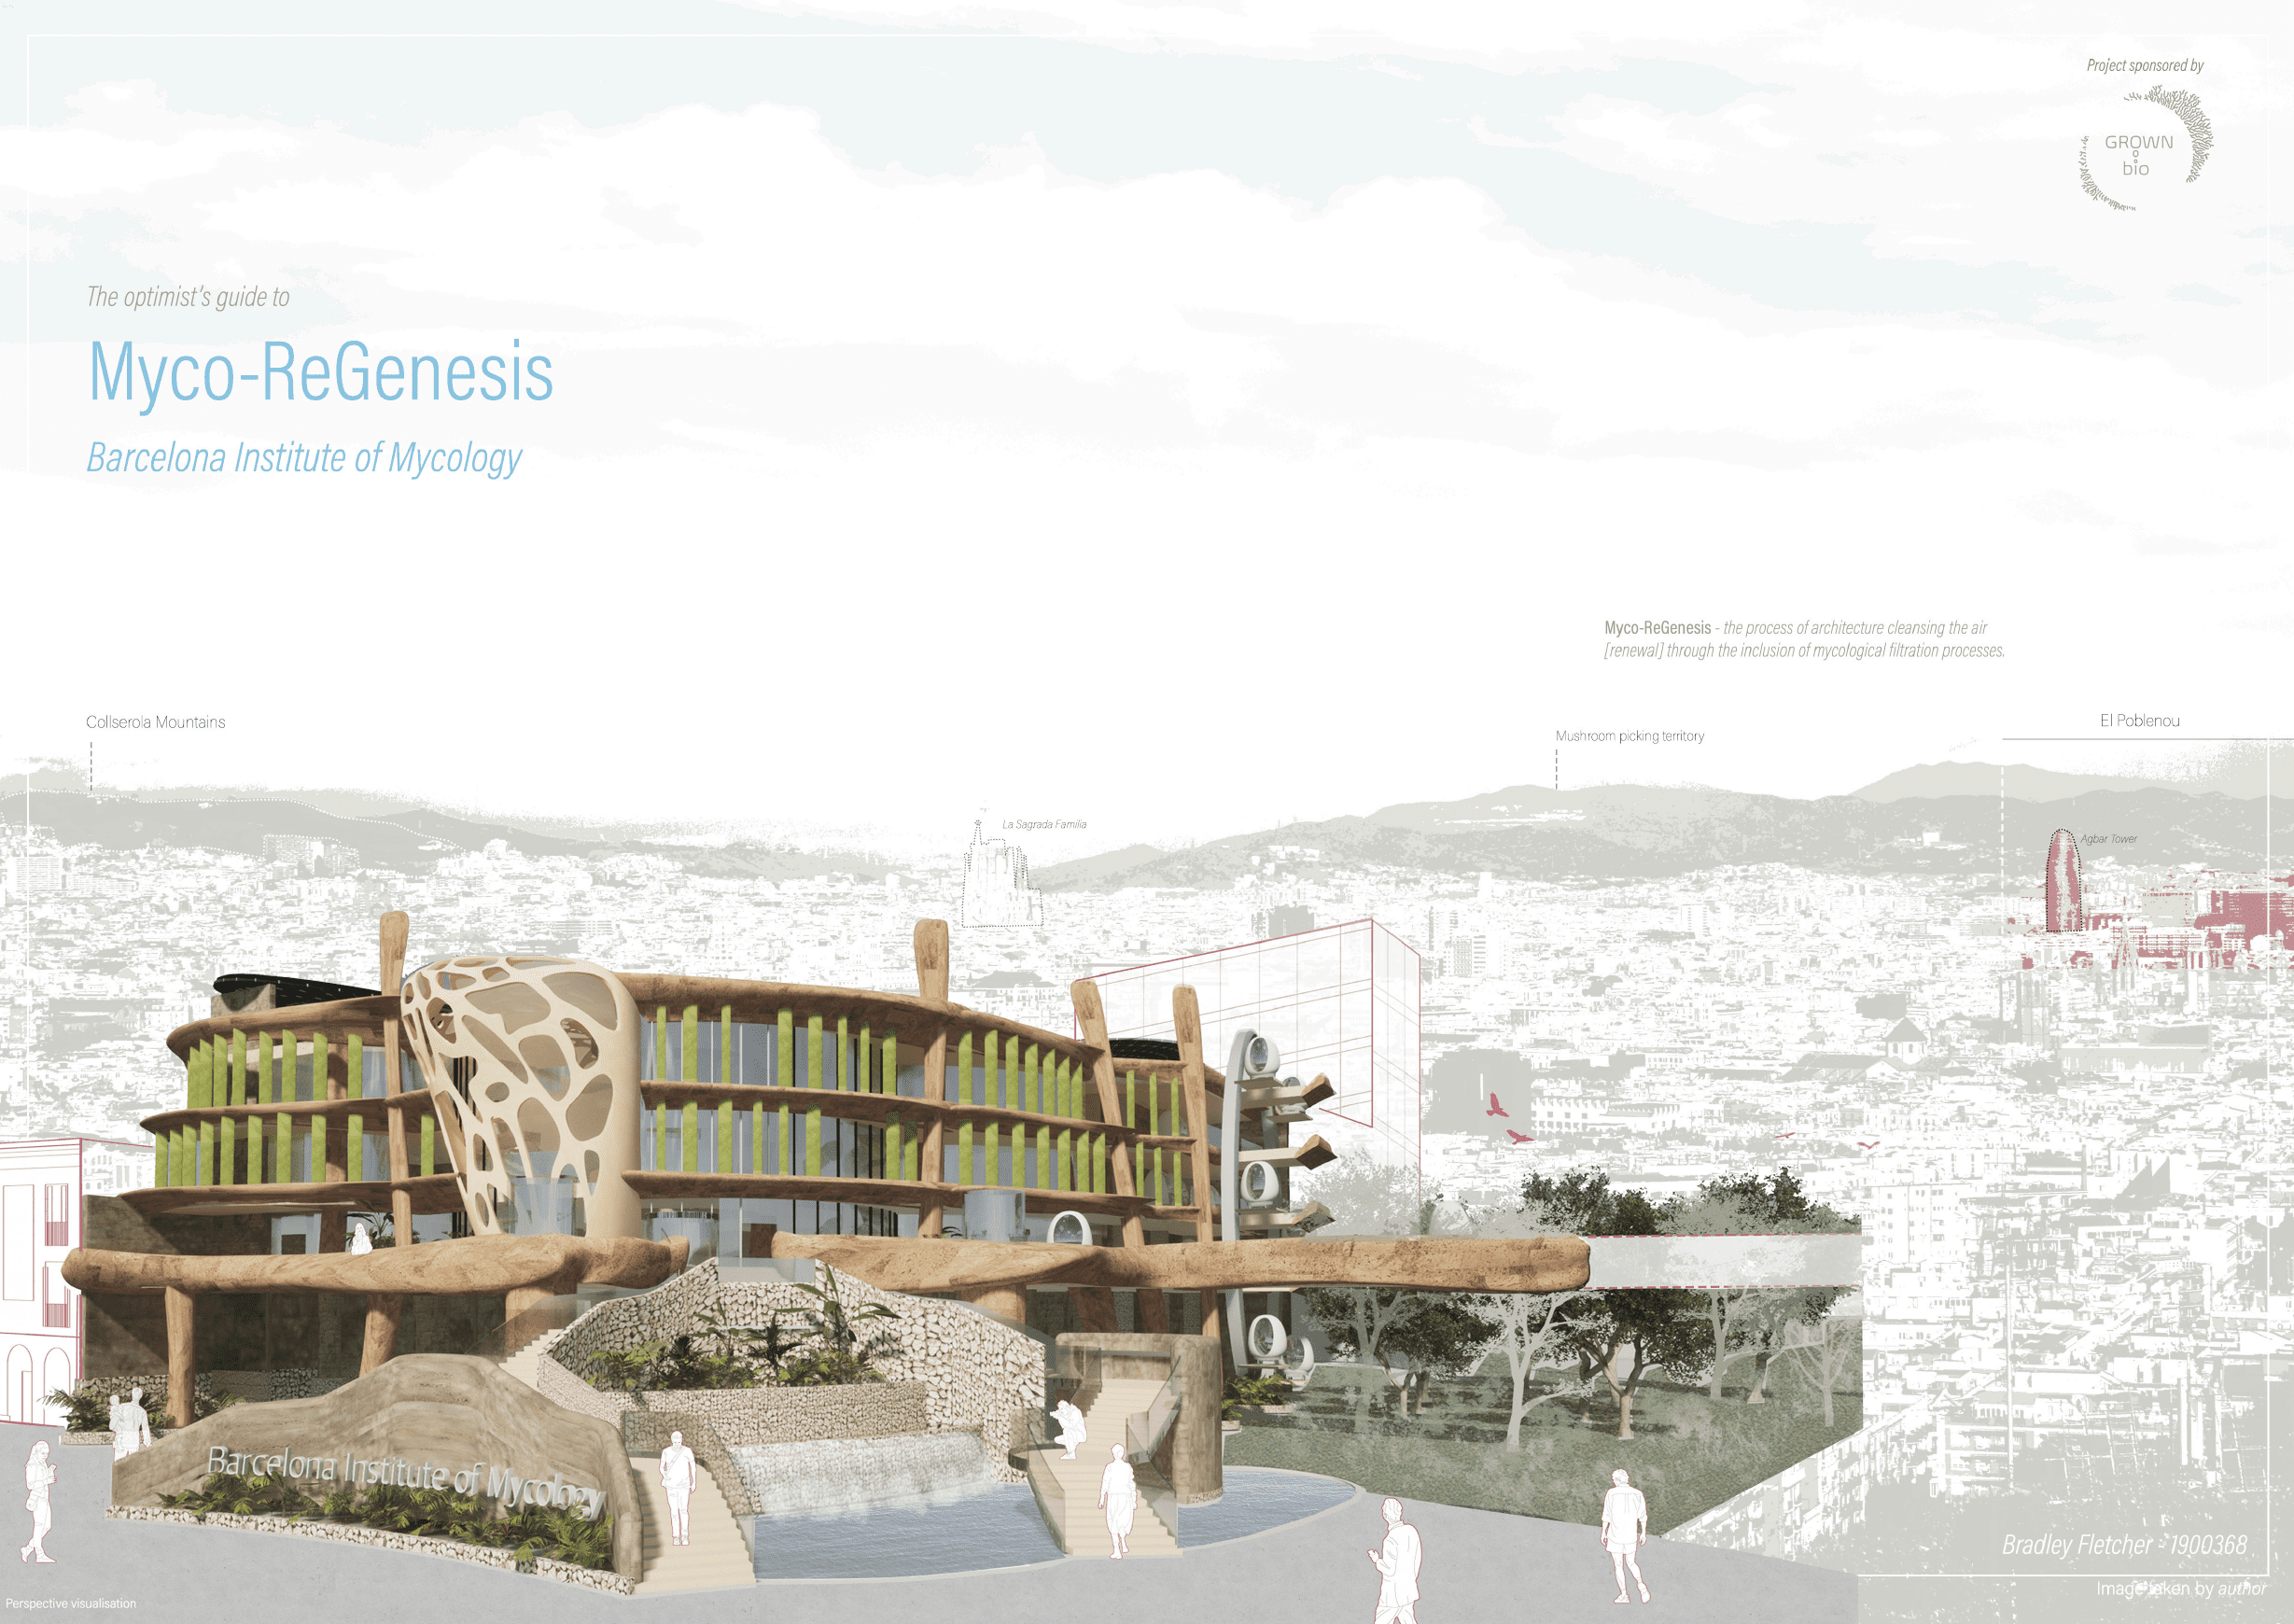 BA (Hons) Architecture work by Bradley Fletcher showing a design project located in Barcelona.